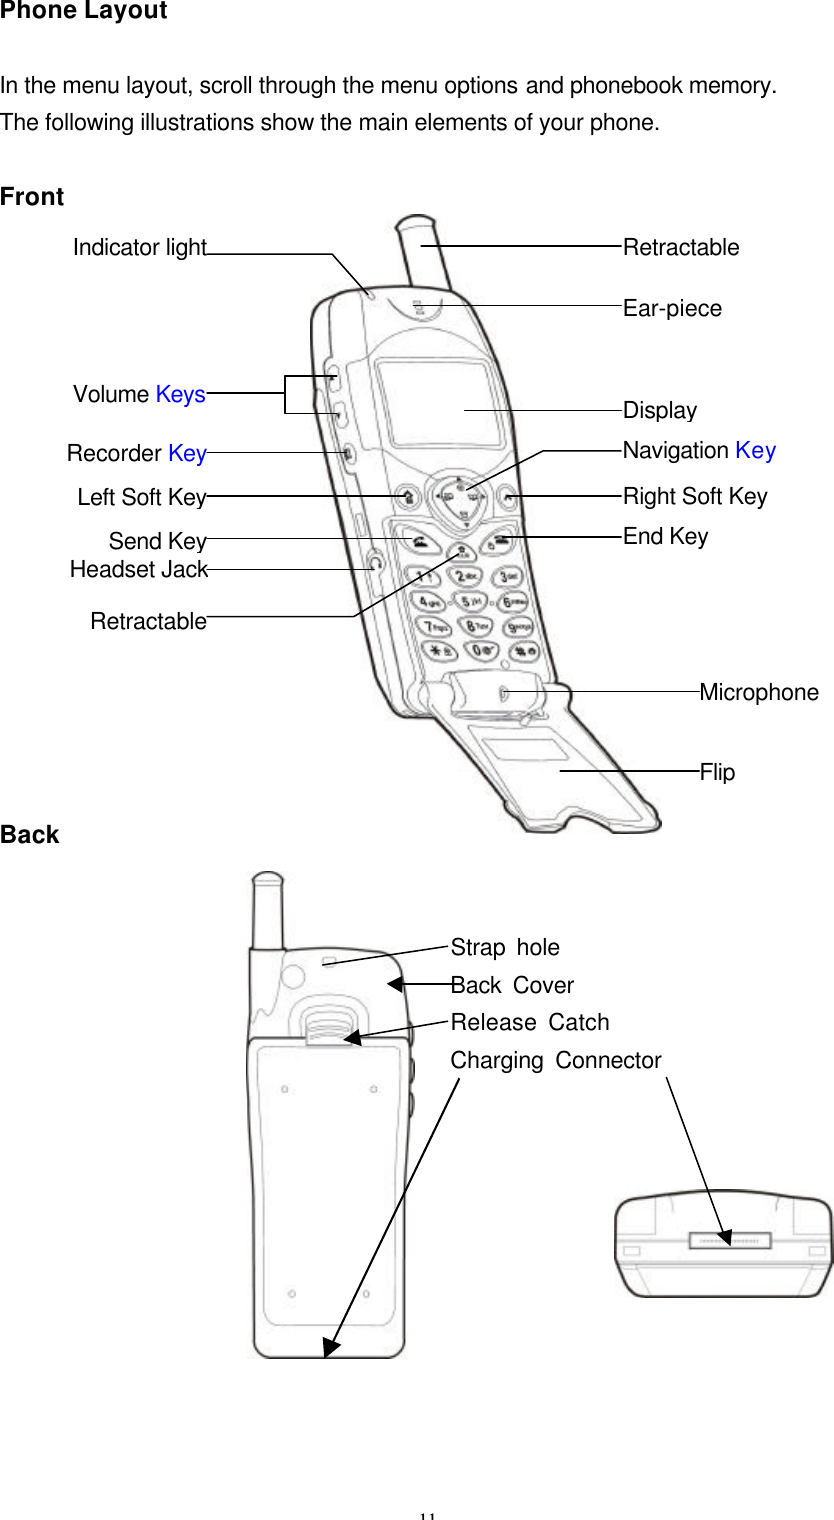 11                                          Phone Layout  In the menu layout, scroll through the menu options and phonebook memory. The following illustrations show the main elements of your phone.  Front                 Back                                           Strap hole                                         Back Cover                                         Release Catch                                         Charging Connector   Retractable Ear-piece Display Navigation Key Right Soft Key End Key Microphone Flip Indicator lightVolume KeysRecorder KeyLeft Soft KeySend KeyHeadset JackRetractable 